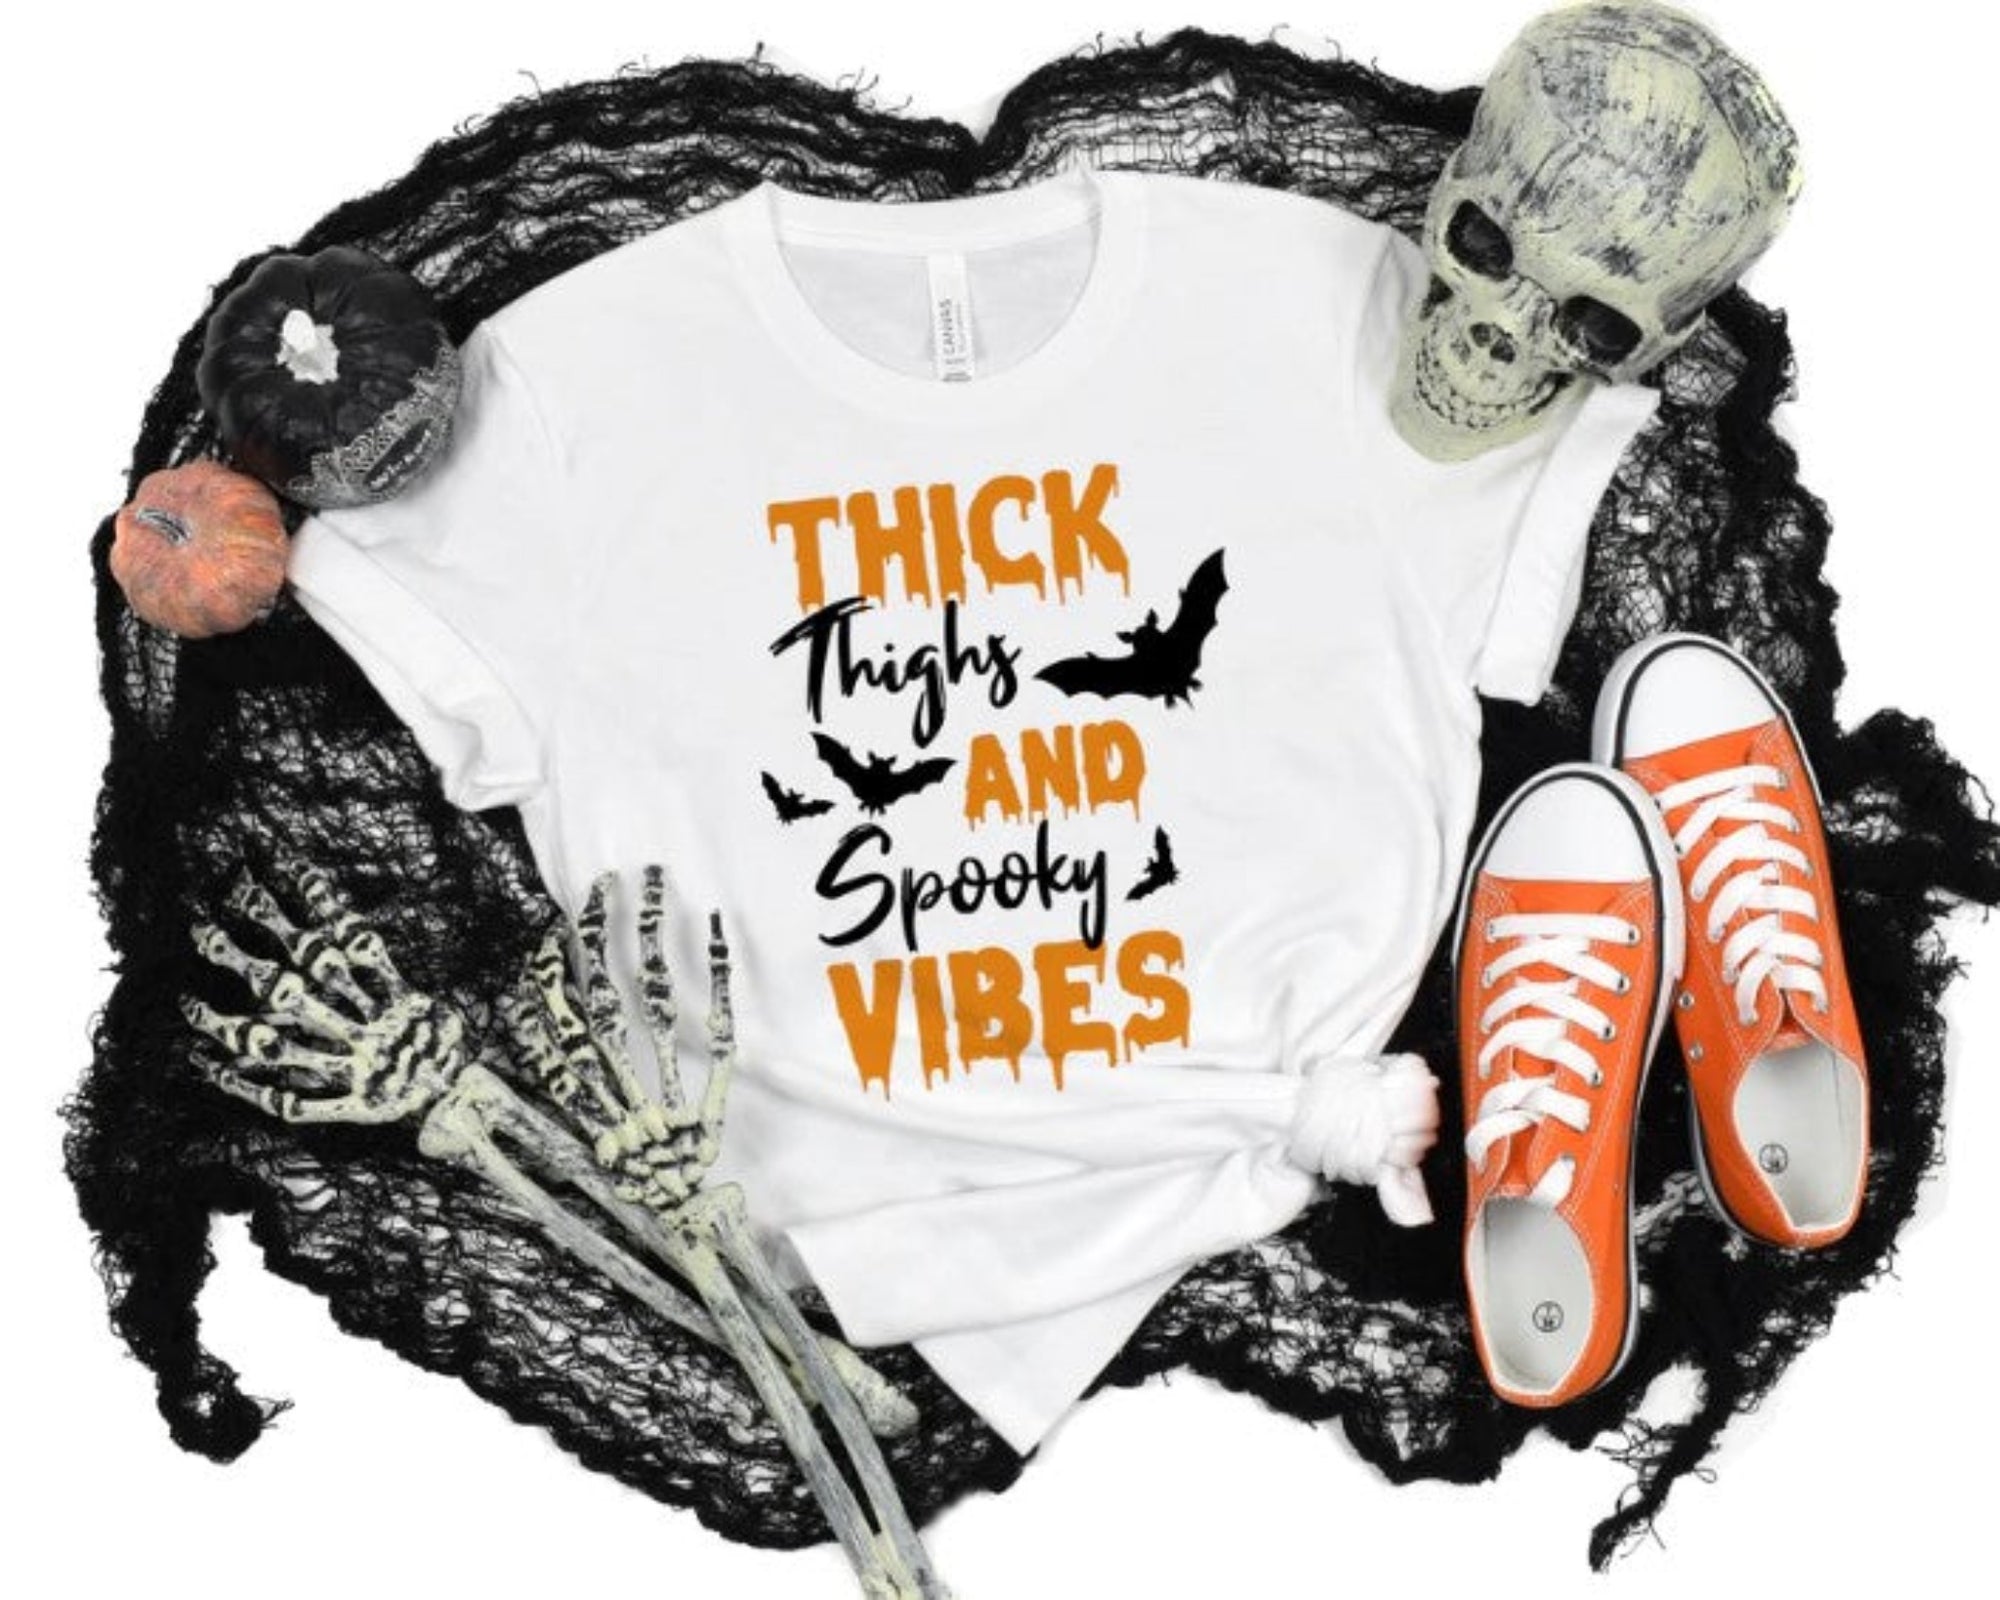 Thick Thighs and spooky vibes-Halloween t-shirt-knotts scary farm-haunted halloween